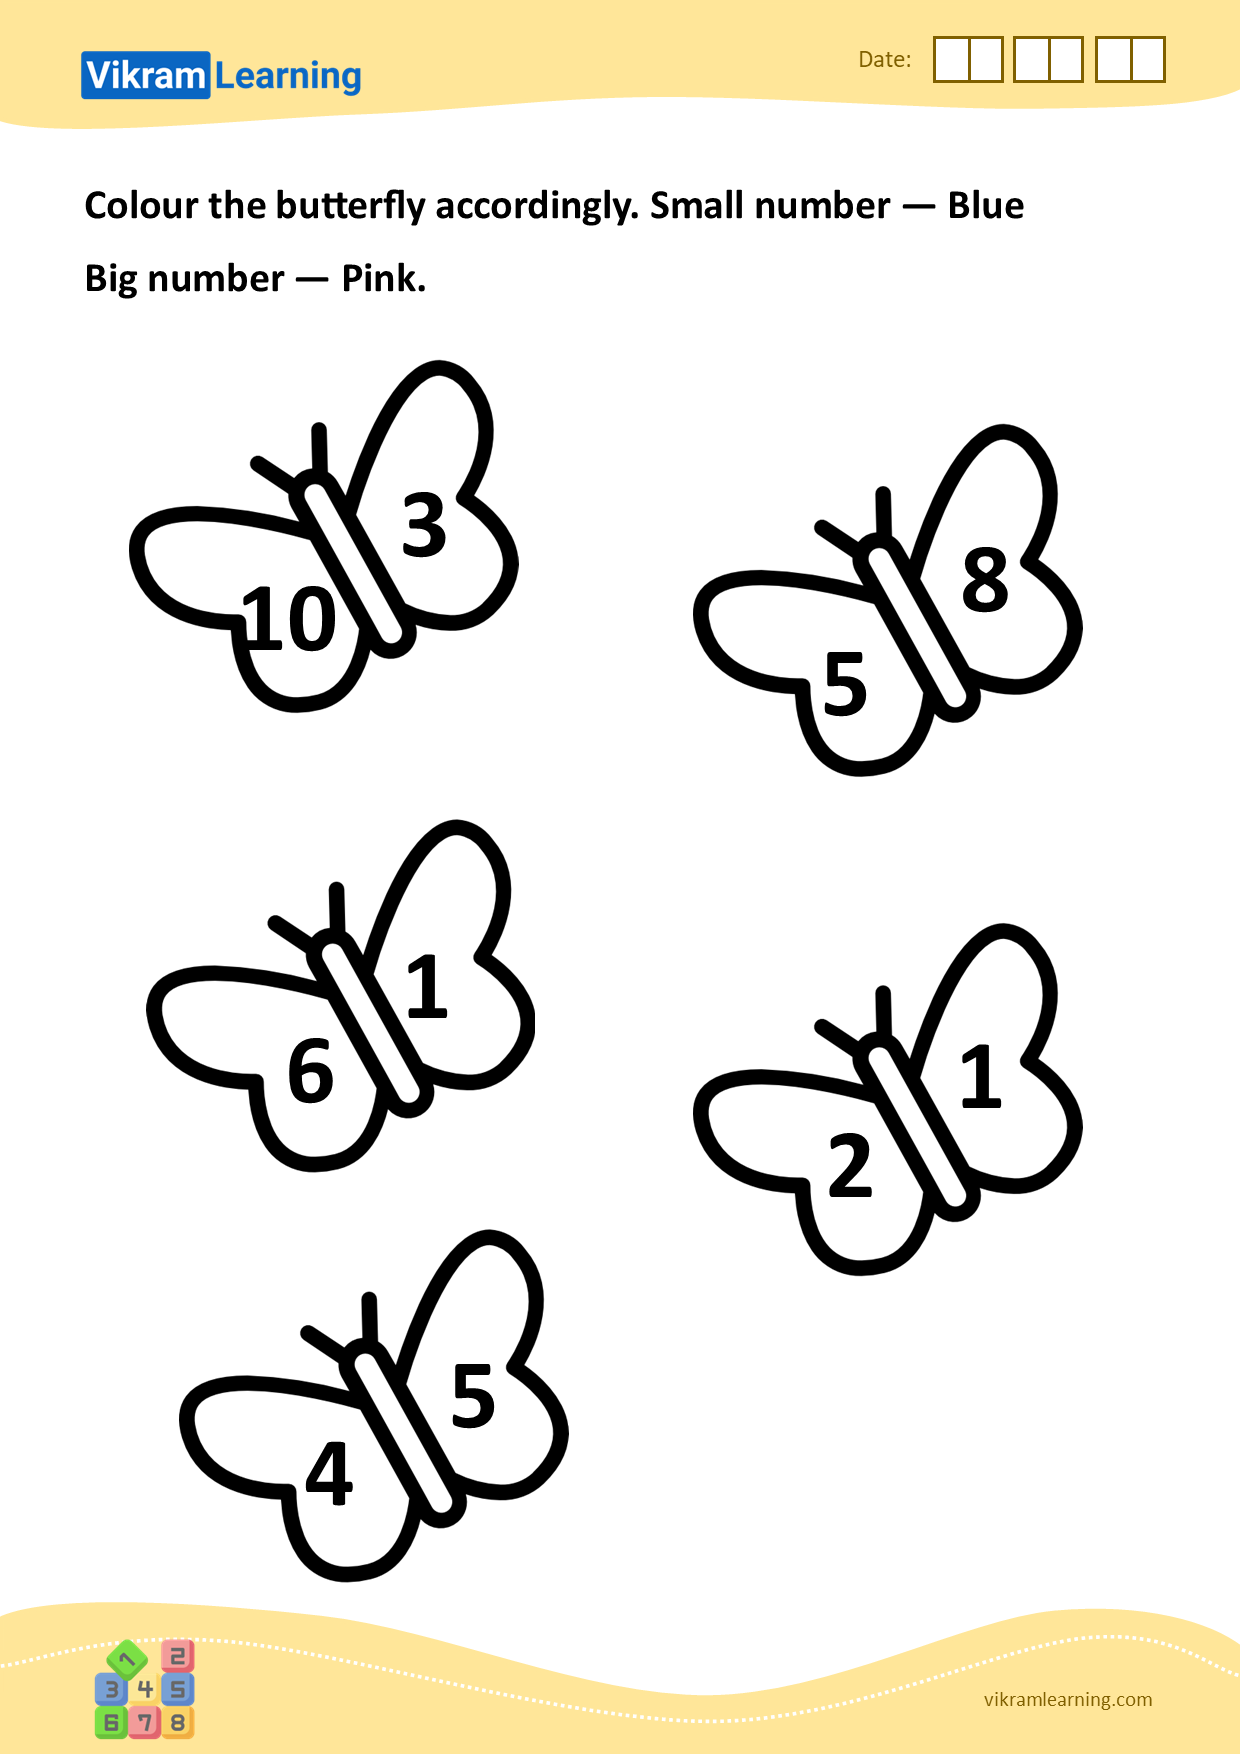 Download colour the butterfly accordingly. small number — blue
big number — pink. worksheets